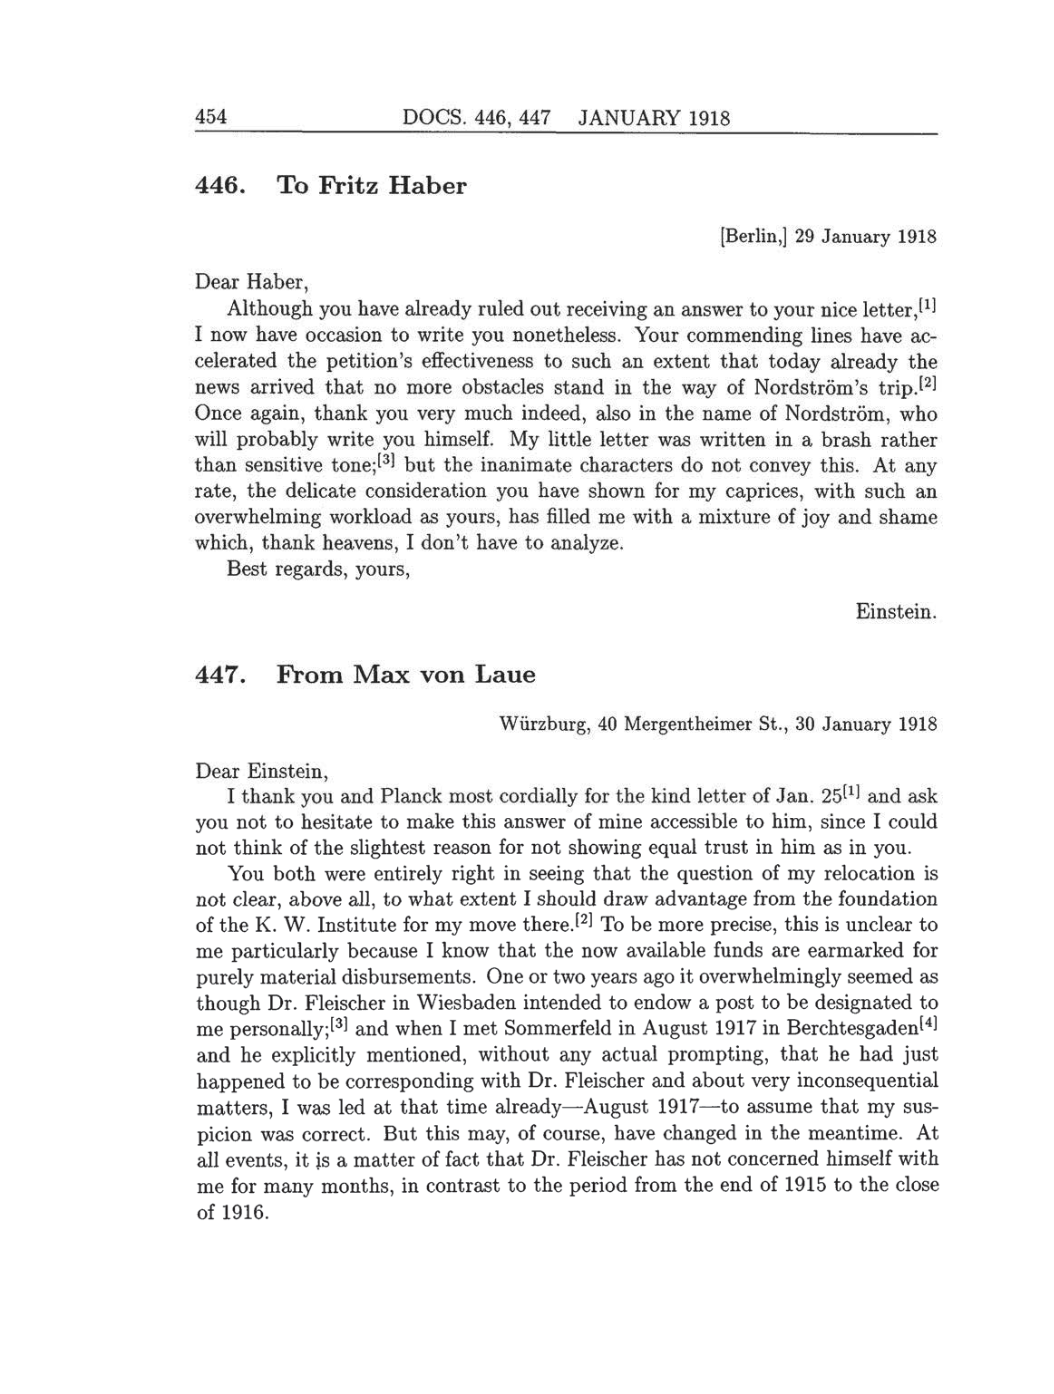 Volume 8: The Berlin Years: Correspondence, 1914-1918 (English translation supplement) page 454